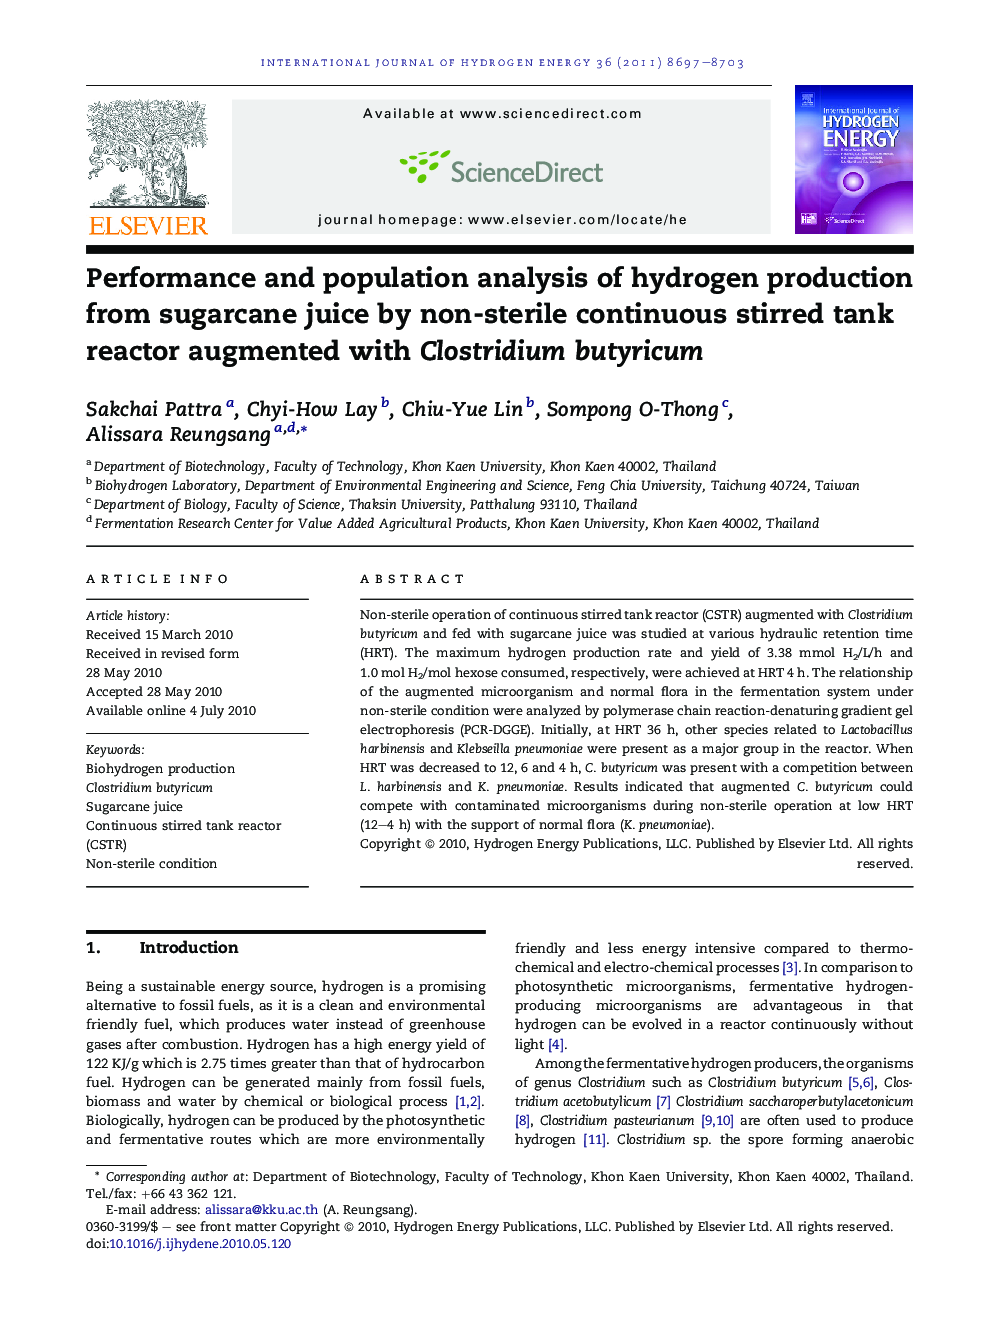 Performance and population analysis of hydrogen production from sugarcane juice by non-sterile continuous stirred tank reactor augmented with Clostridium butyricum